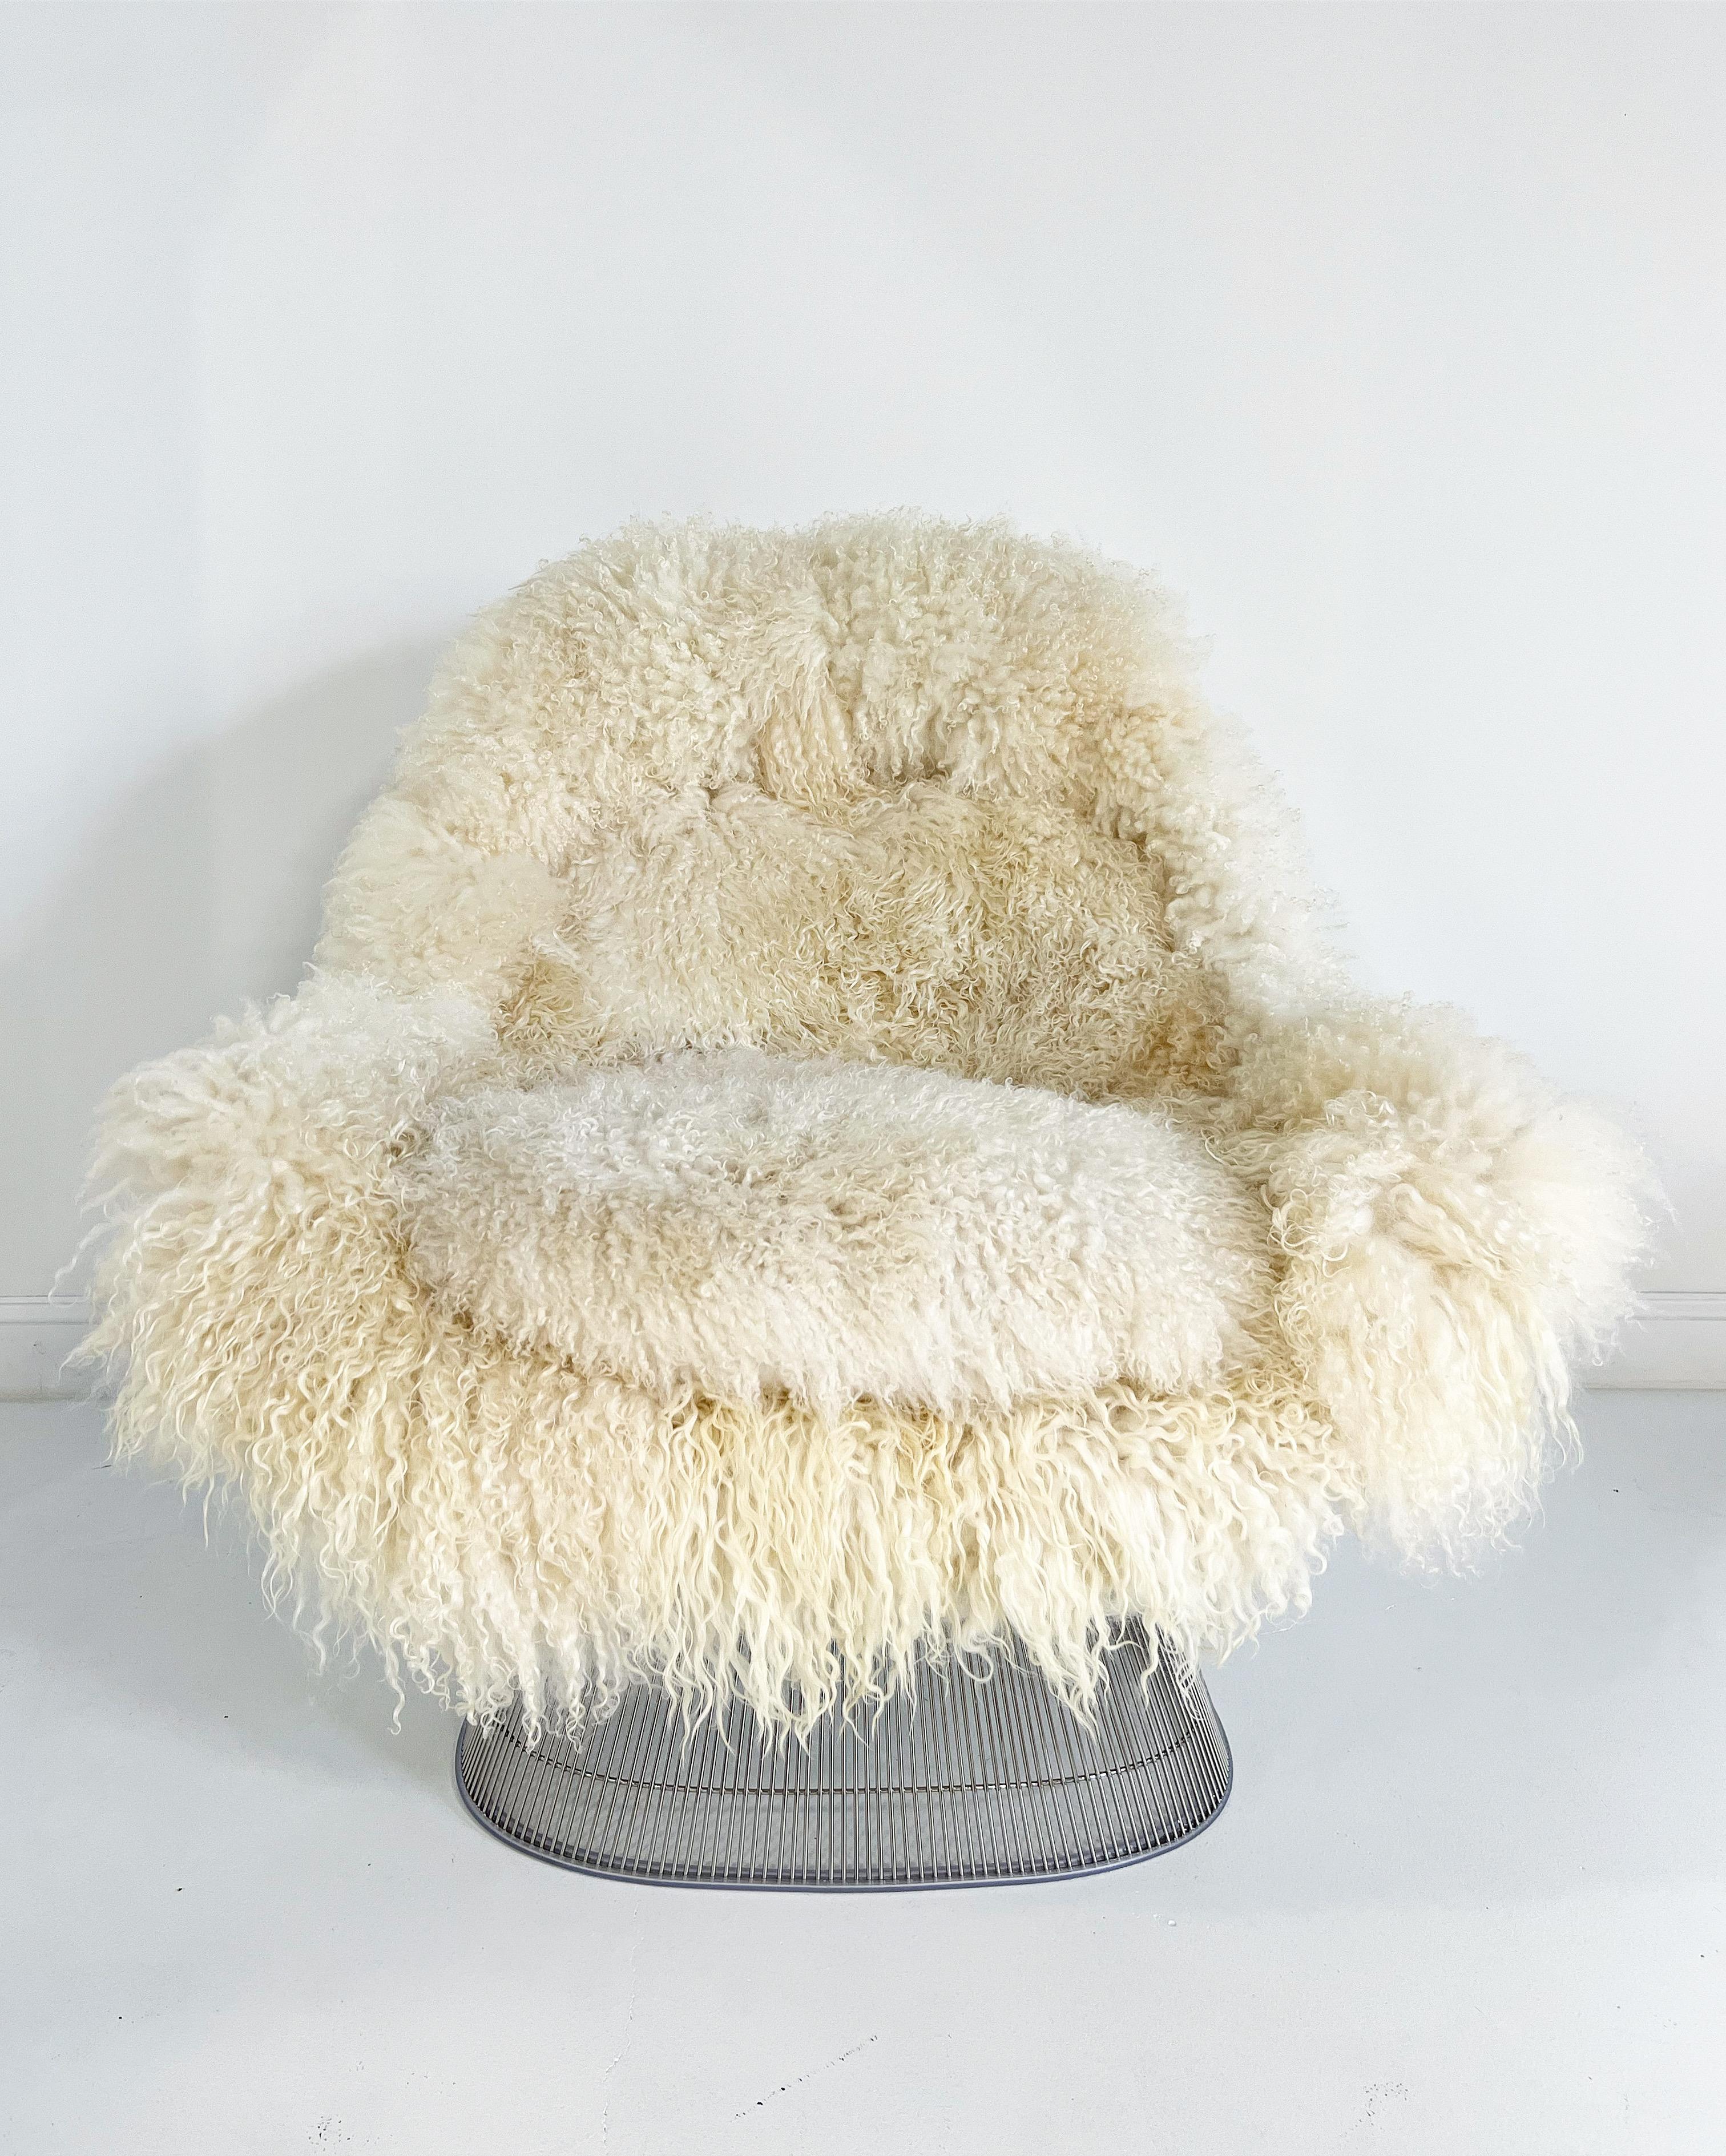 Warren Platner Easy Chair and Ottoman, Restored in Gotland Sheepskin and Leather 3